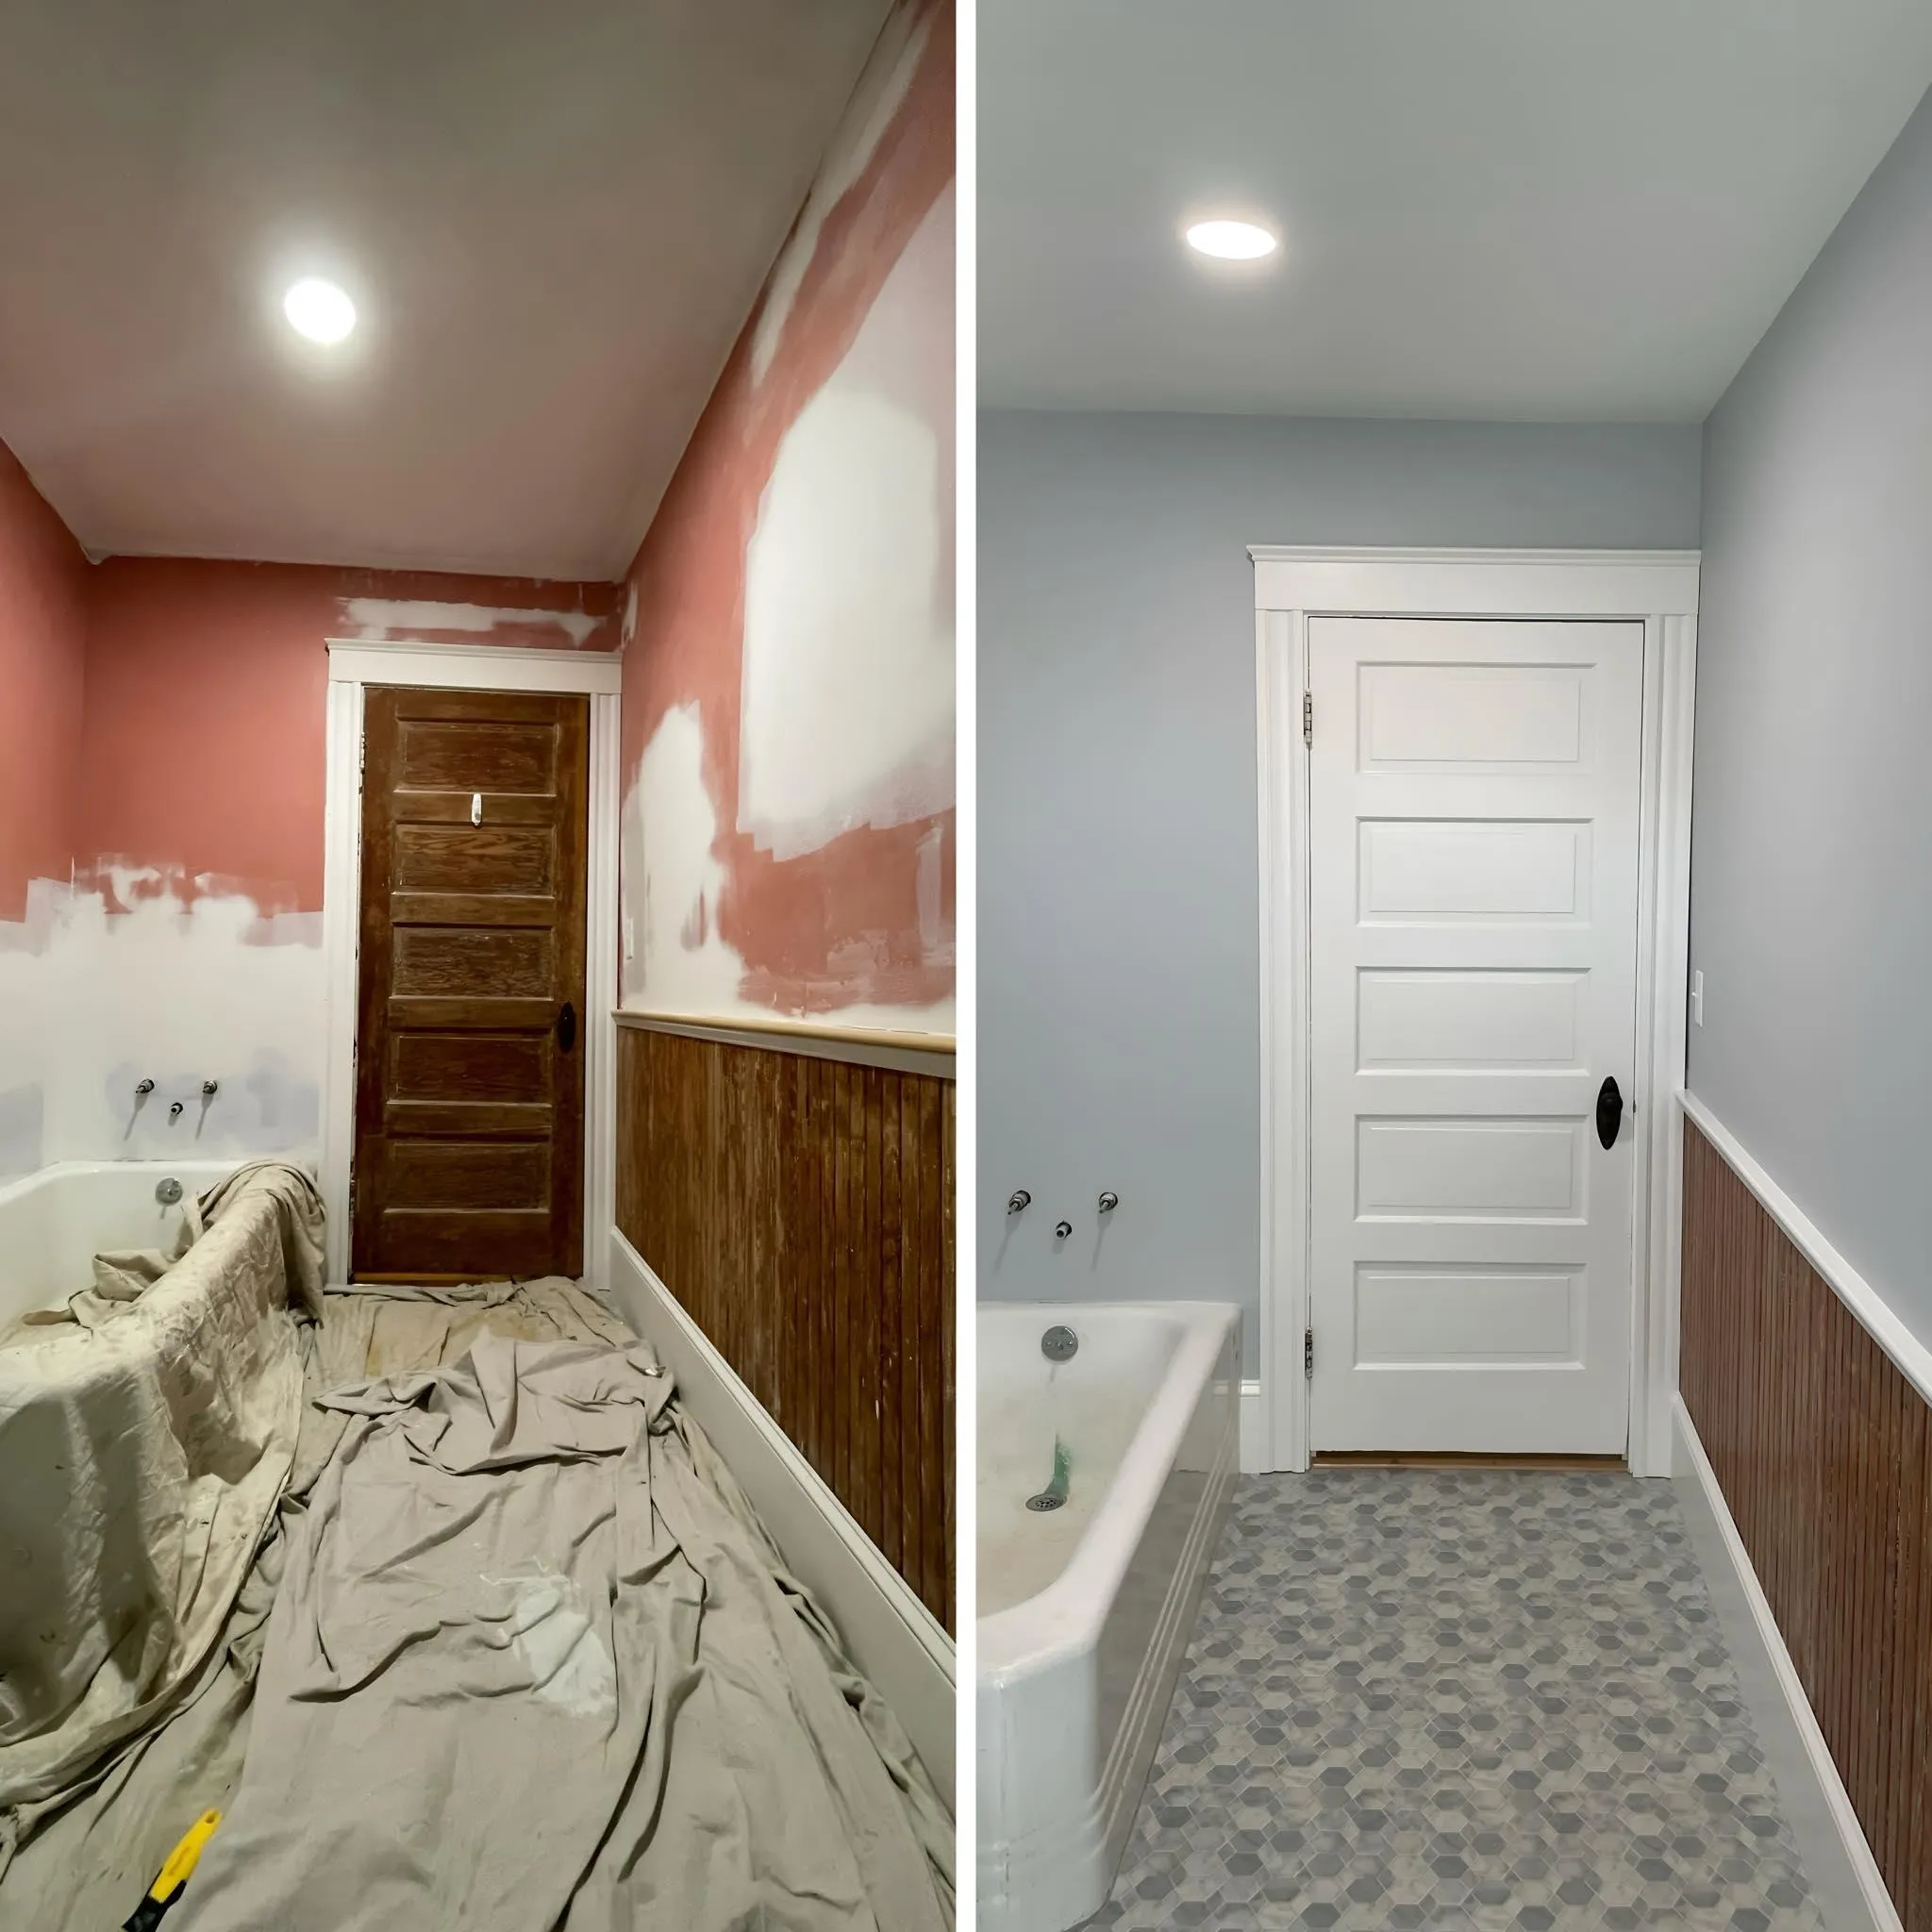 Interior Painting for Infinite Painting LLC in Londonderry, New Hampshire